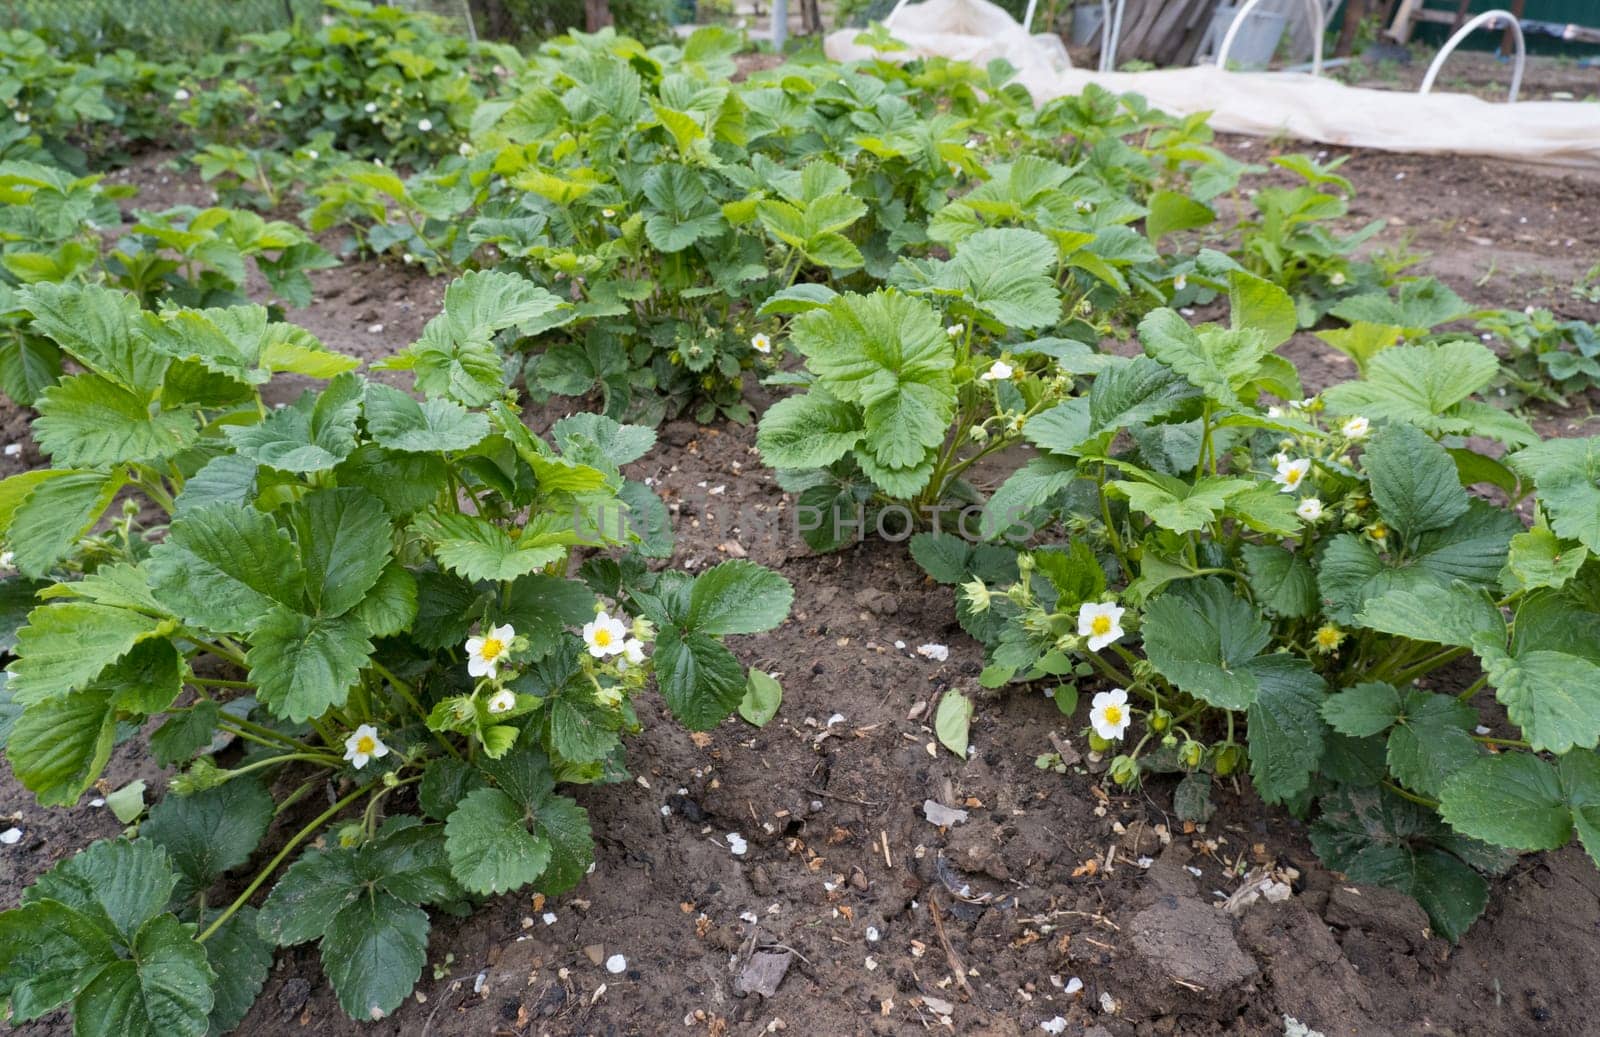 Blooming strawberry bushes. Strawberry plants with flowers and berries. by Ekaterina34